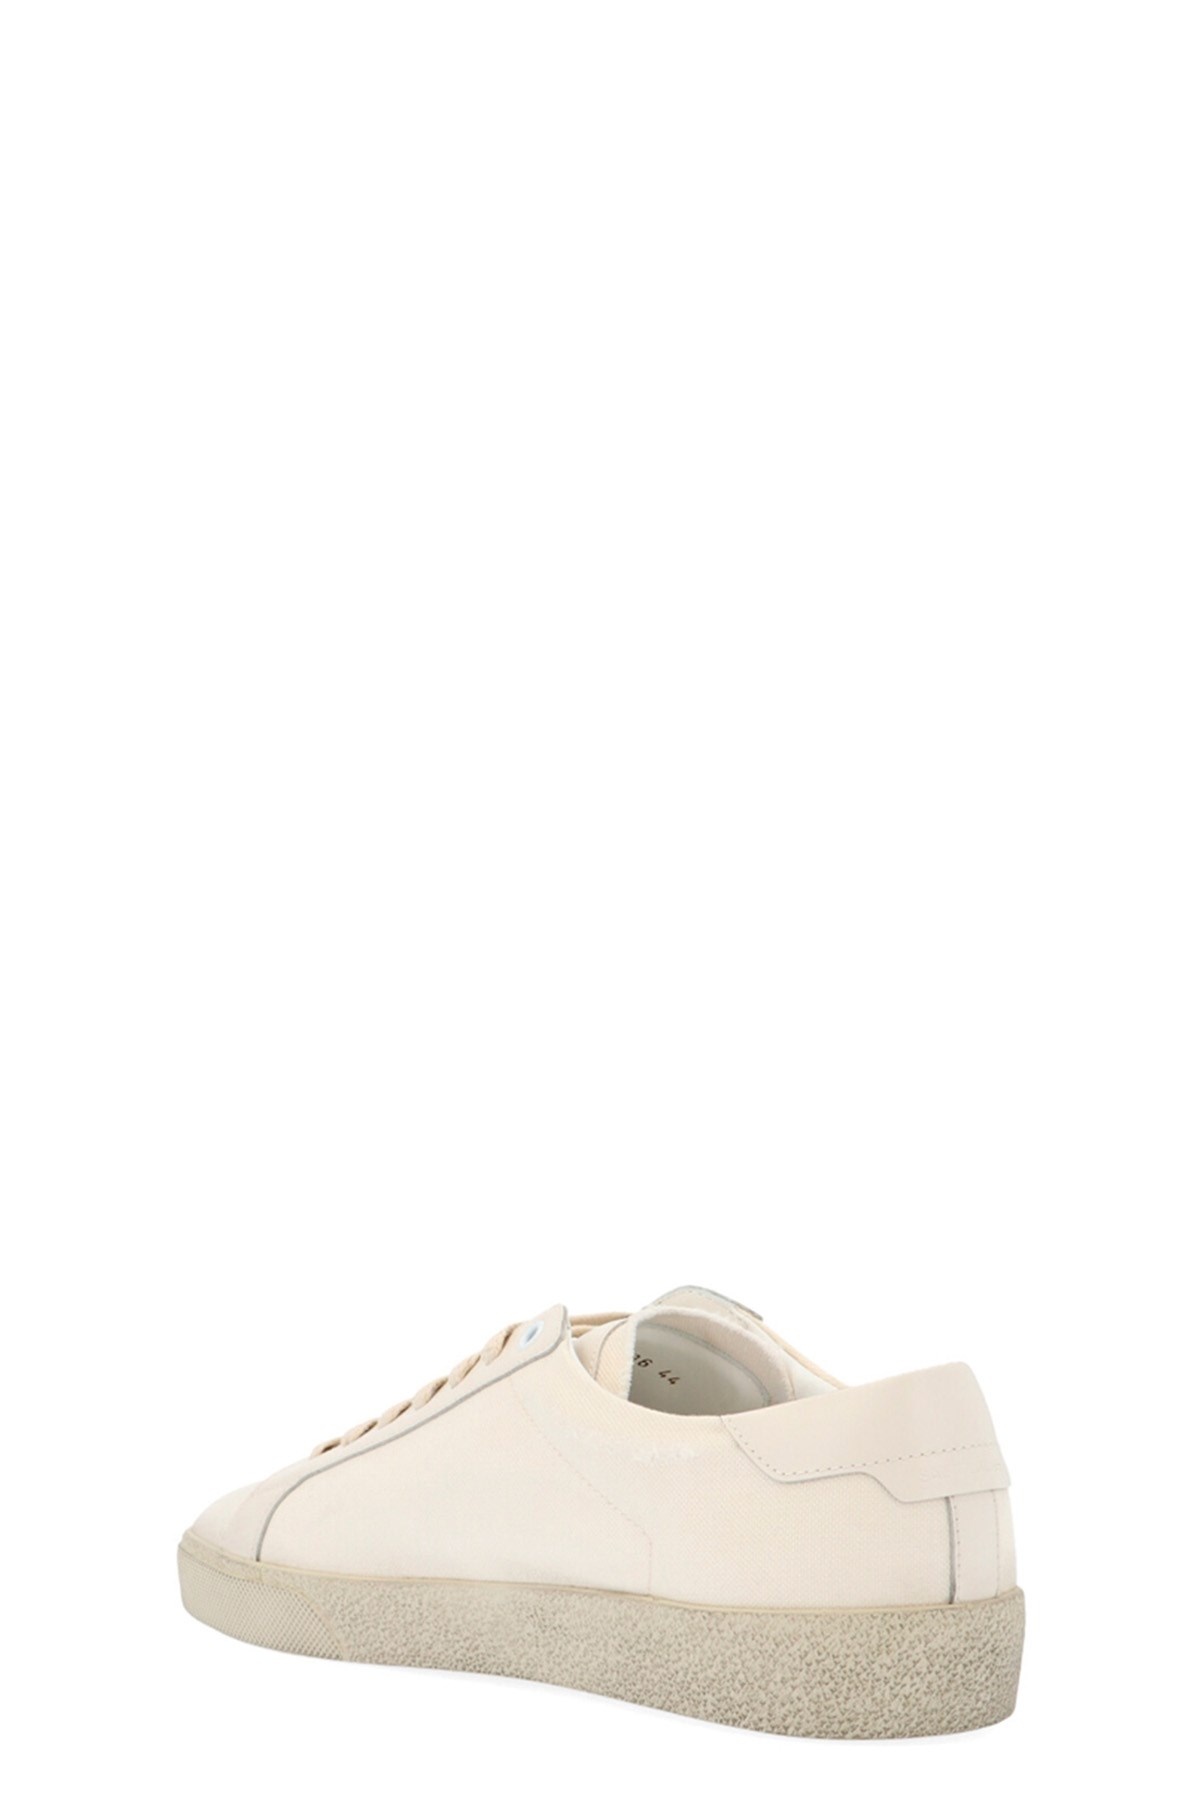 'Court Classic' sneakers - 2